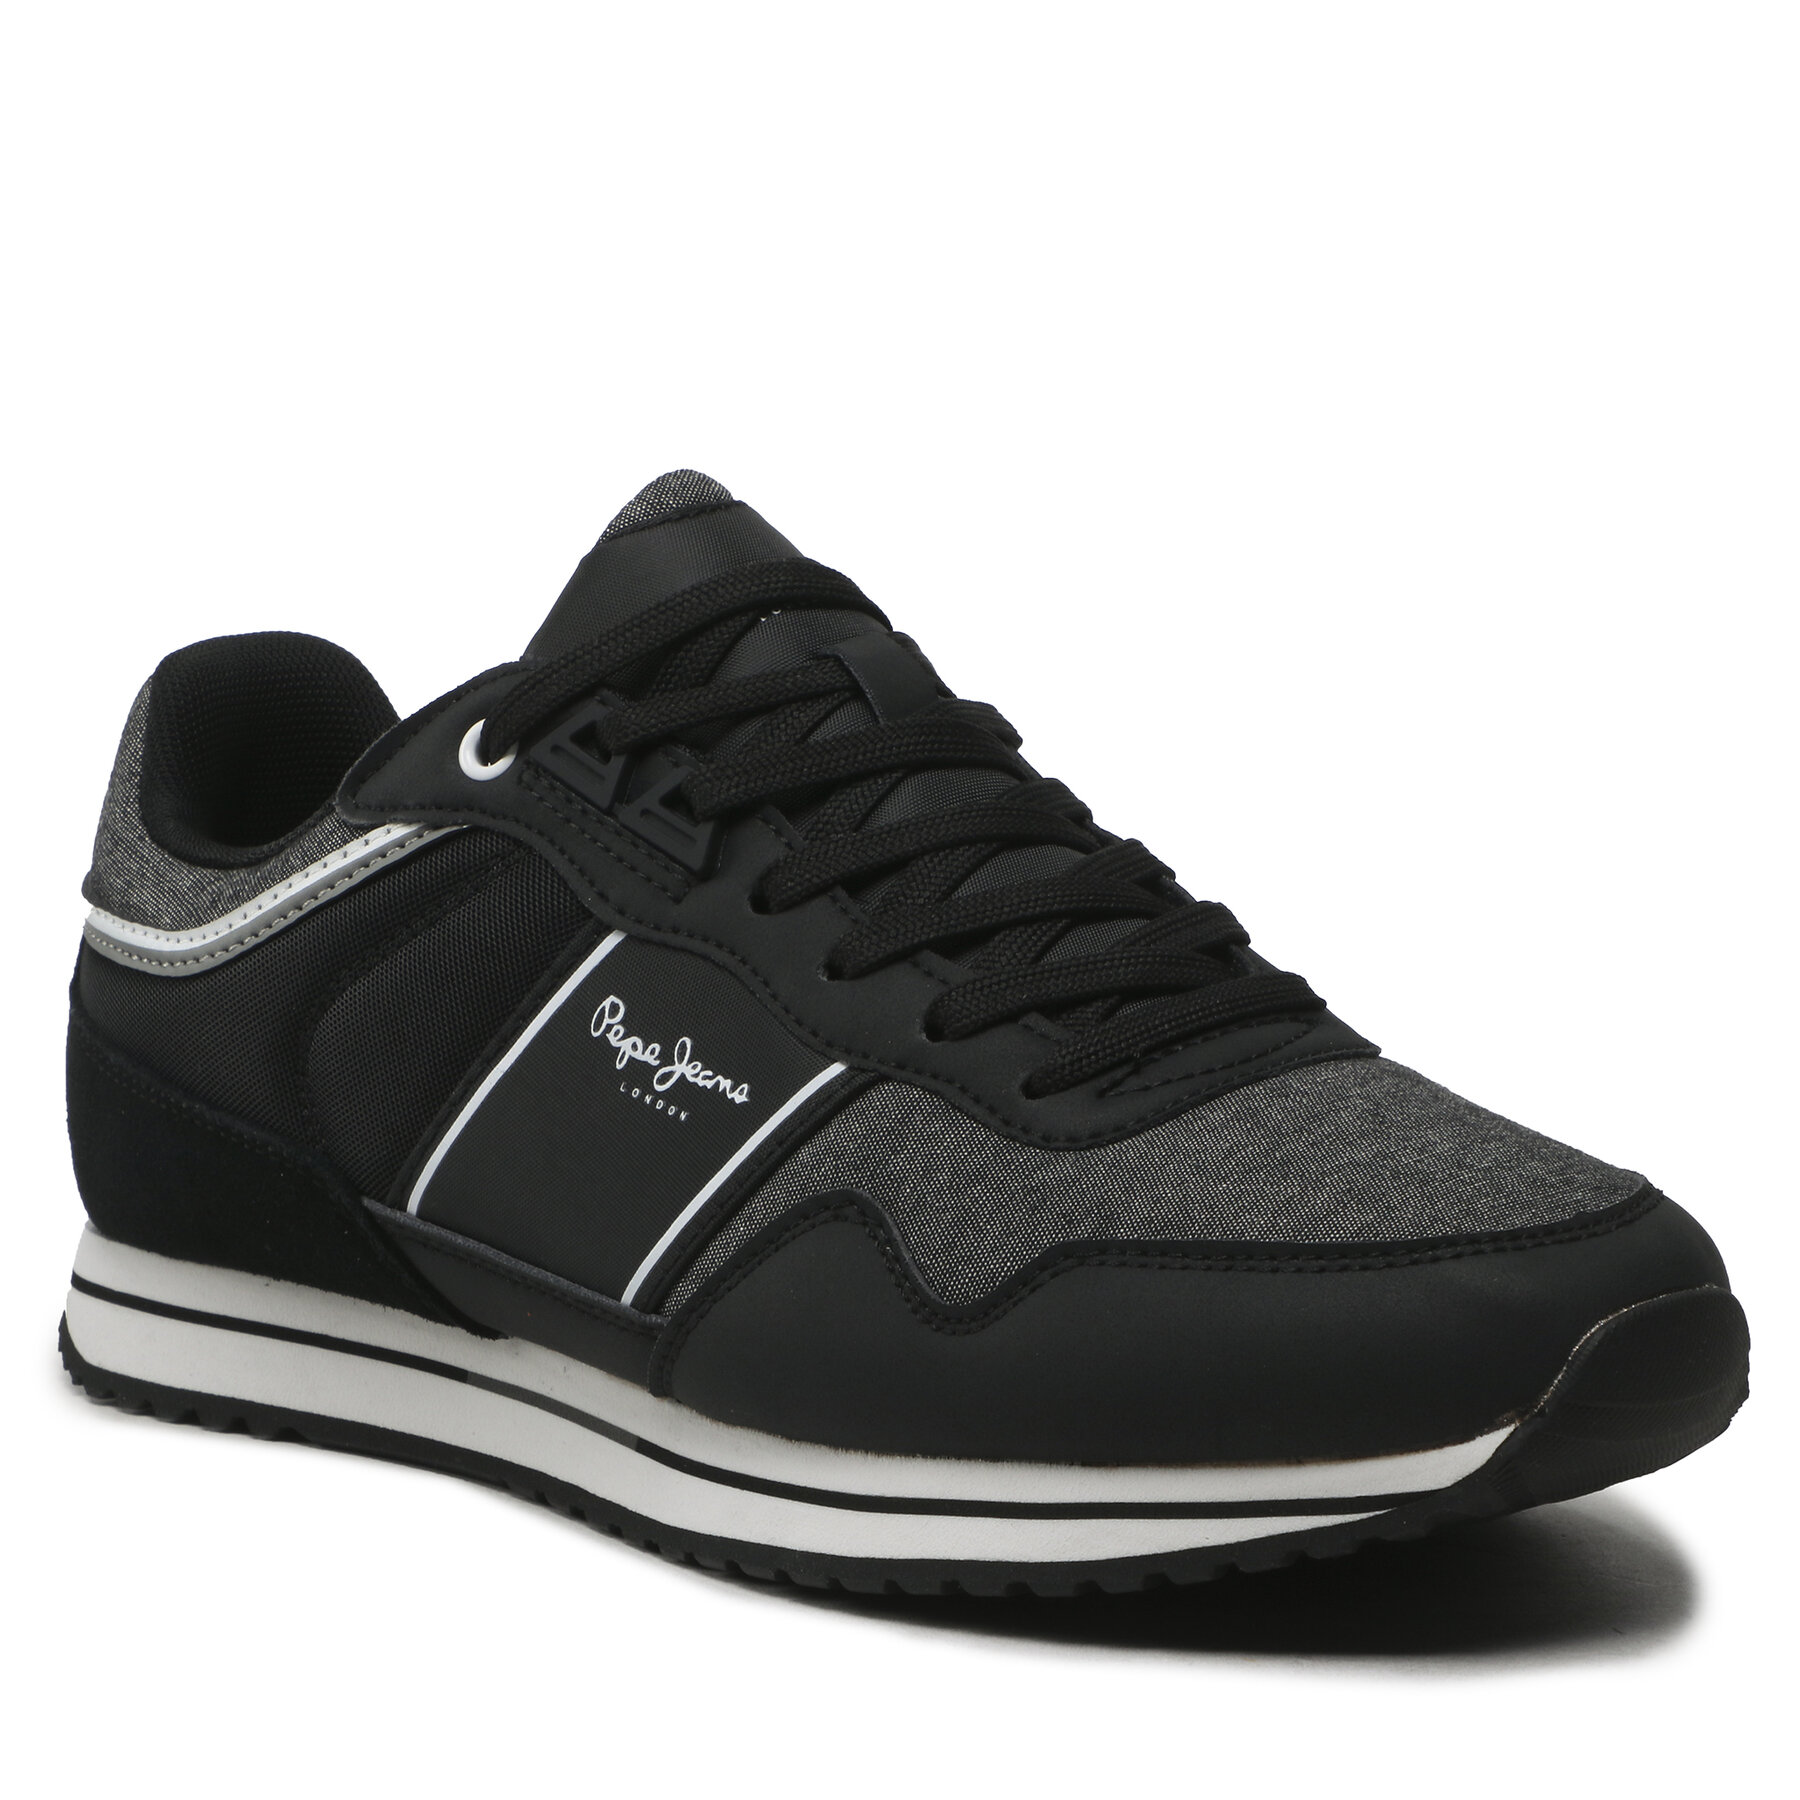 Sneakers Pepe Jeans Tour Club PMS30908 Black 999 999 imagine 2022 reducere